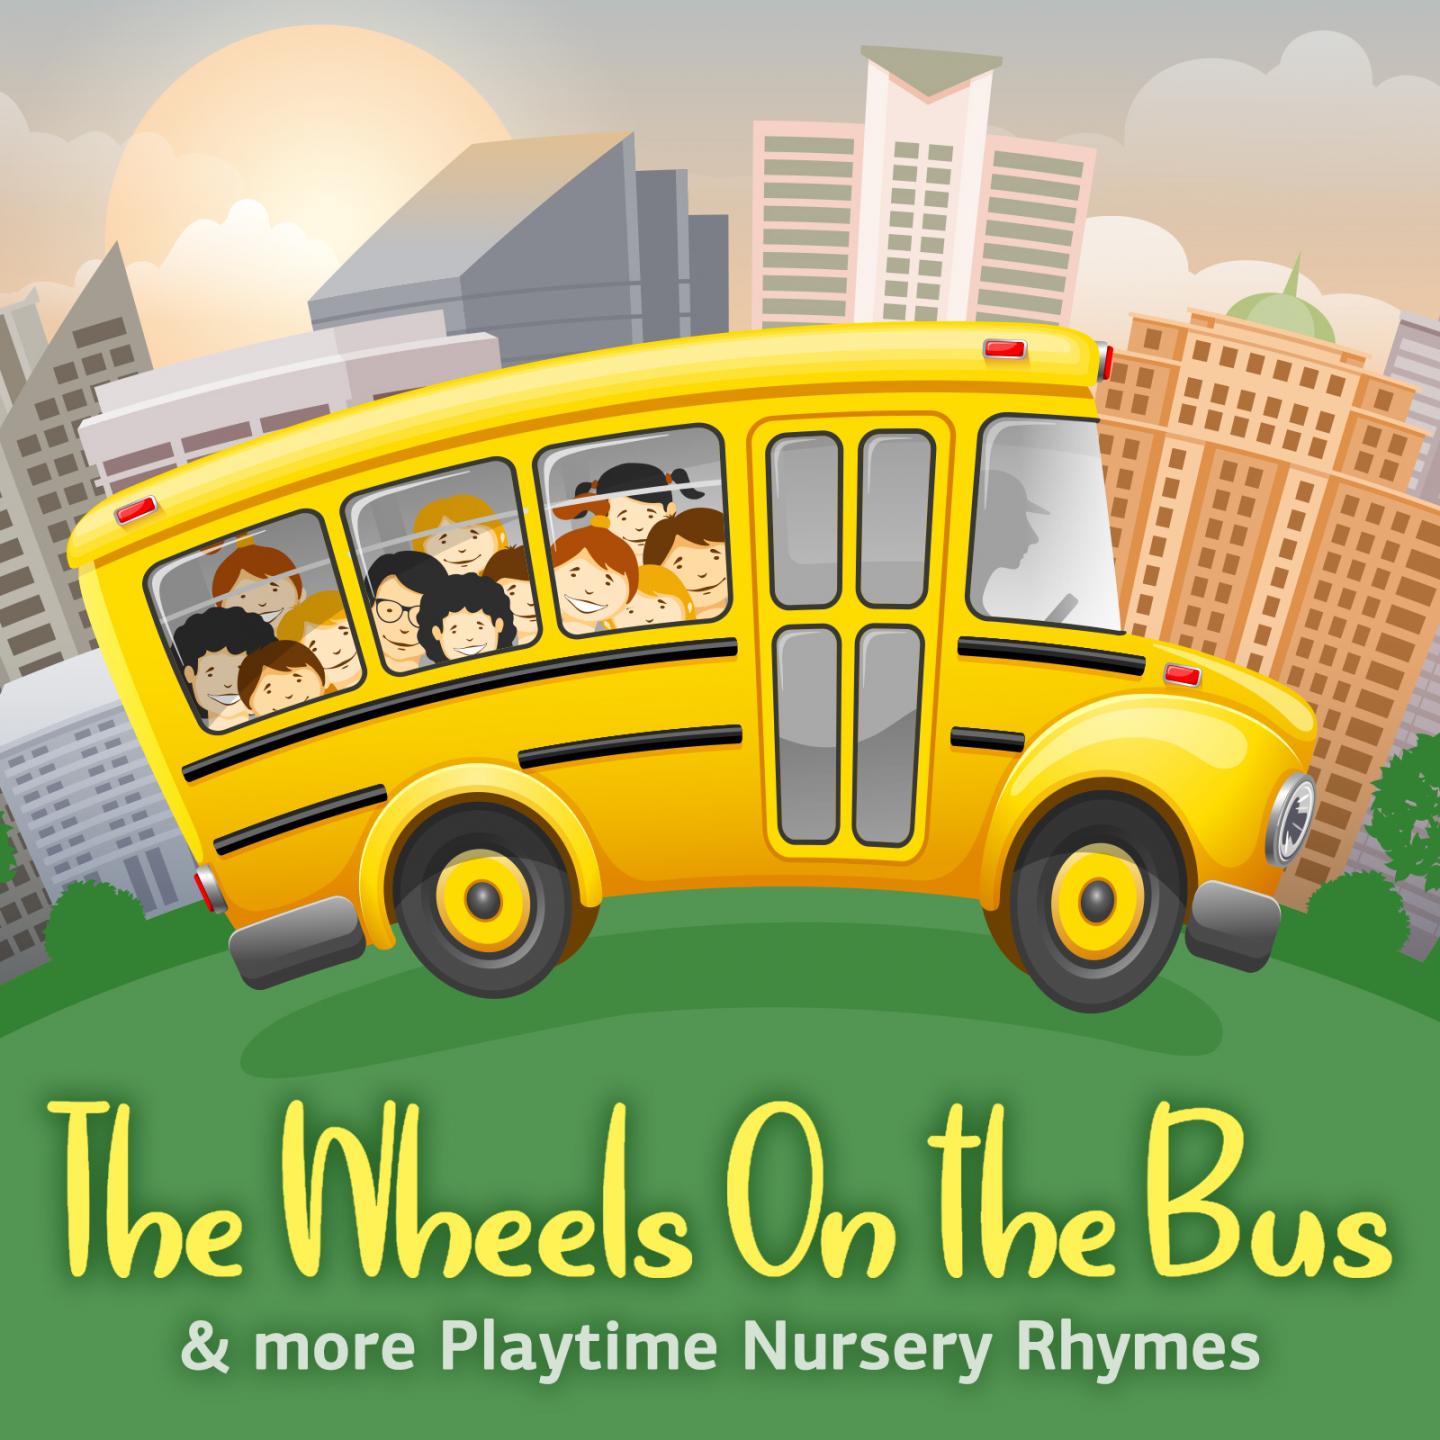 The Wheels on the Bus & More Playtime Nursery Rhymes